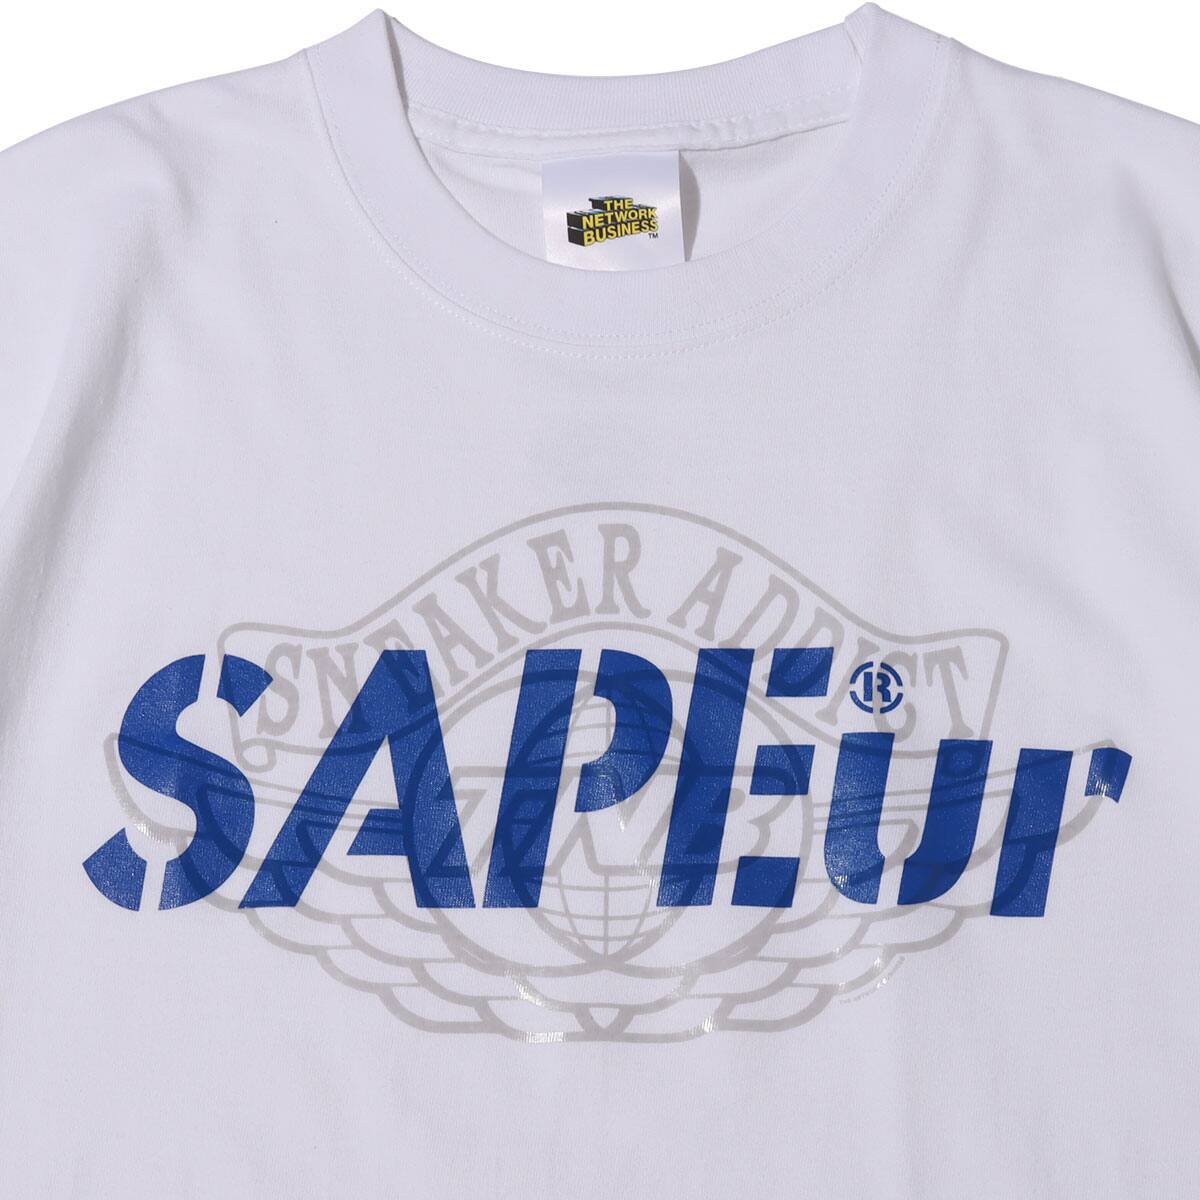 THE NETWORK BUSINESS SNKRDUNK×SAPEur×THE NETWORK BUSINESS Wing Tee 